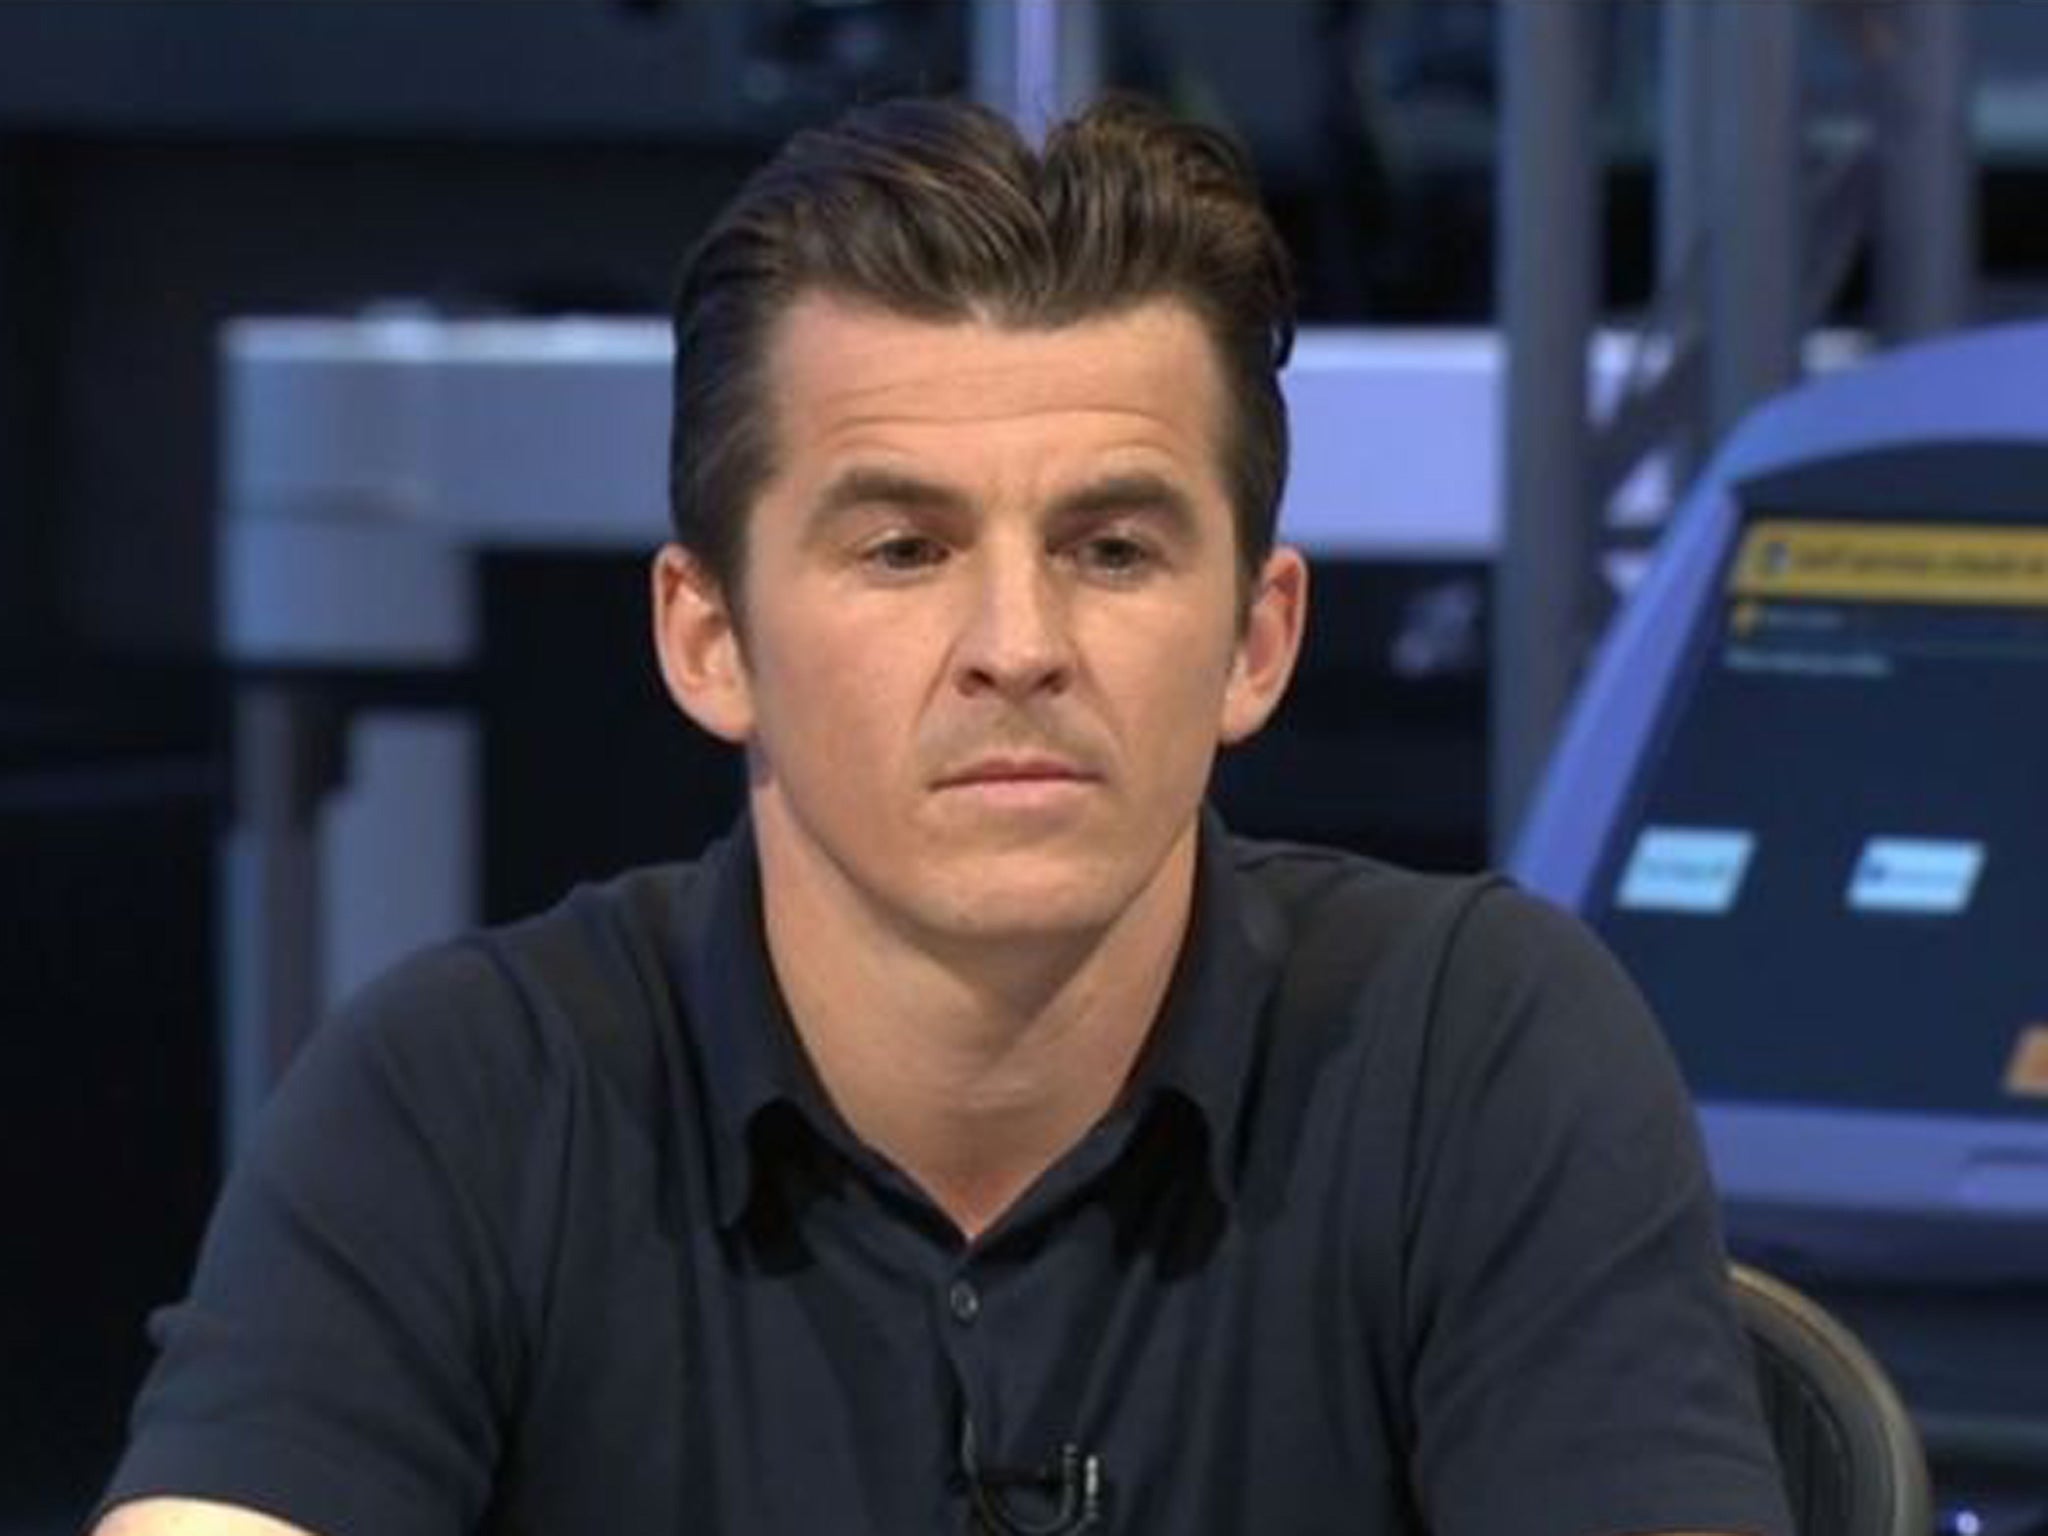 Barton was so reviled two years ago after fighting his way off the pitch against Manchester City that he had to leave the country because no employer would touch him